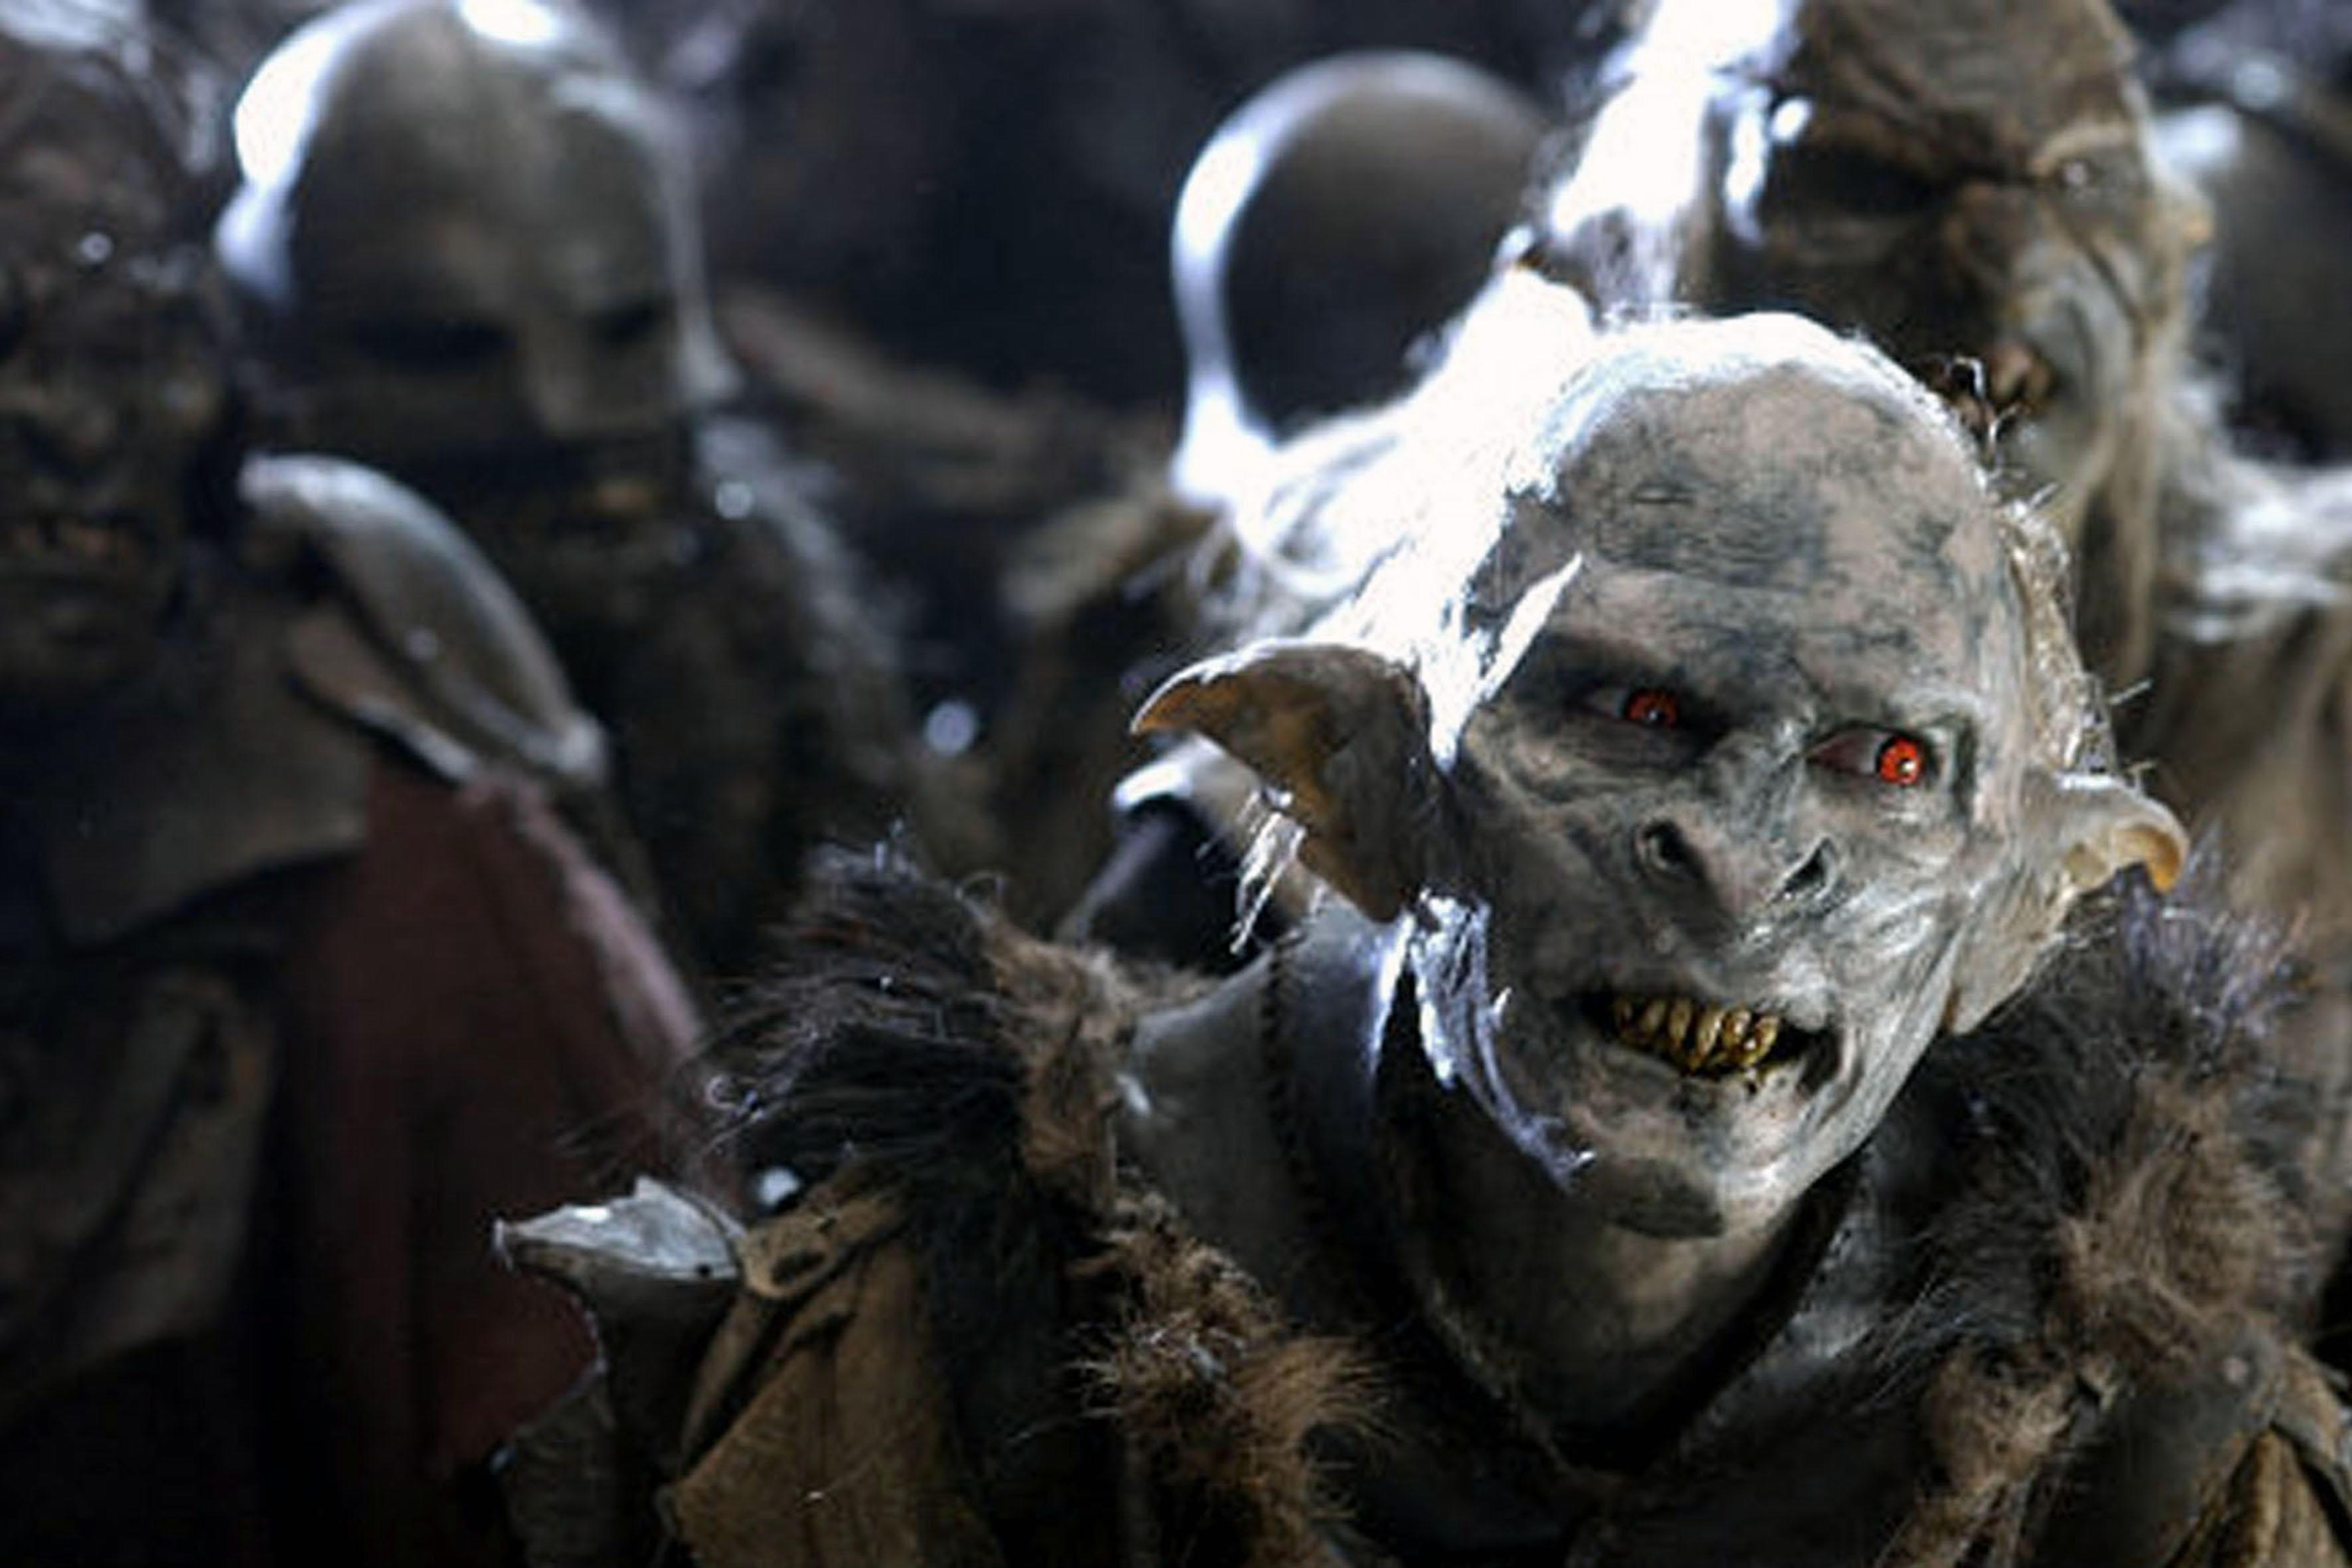 Got a face like an orc? Amazon TV show based on Lord of the Rings has an attractive offer